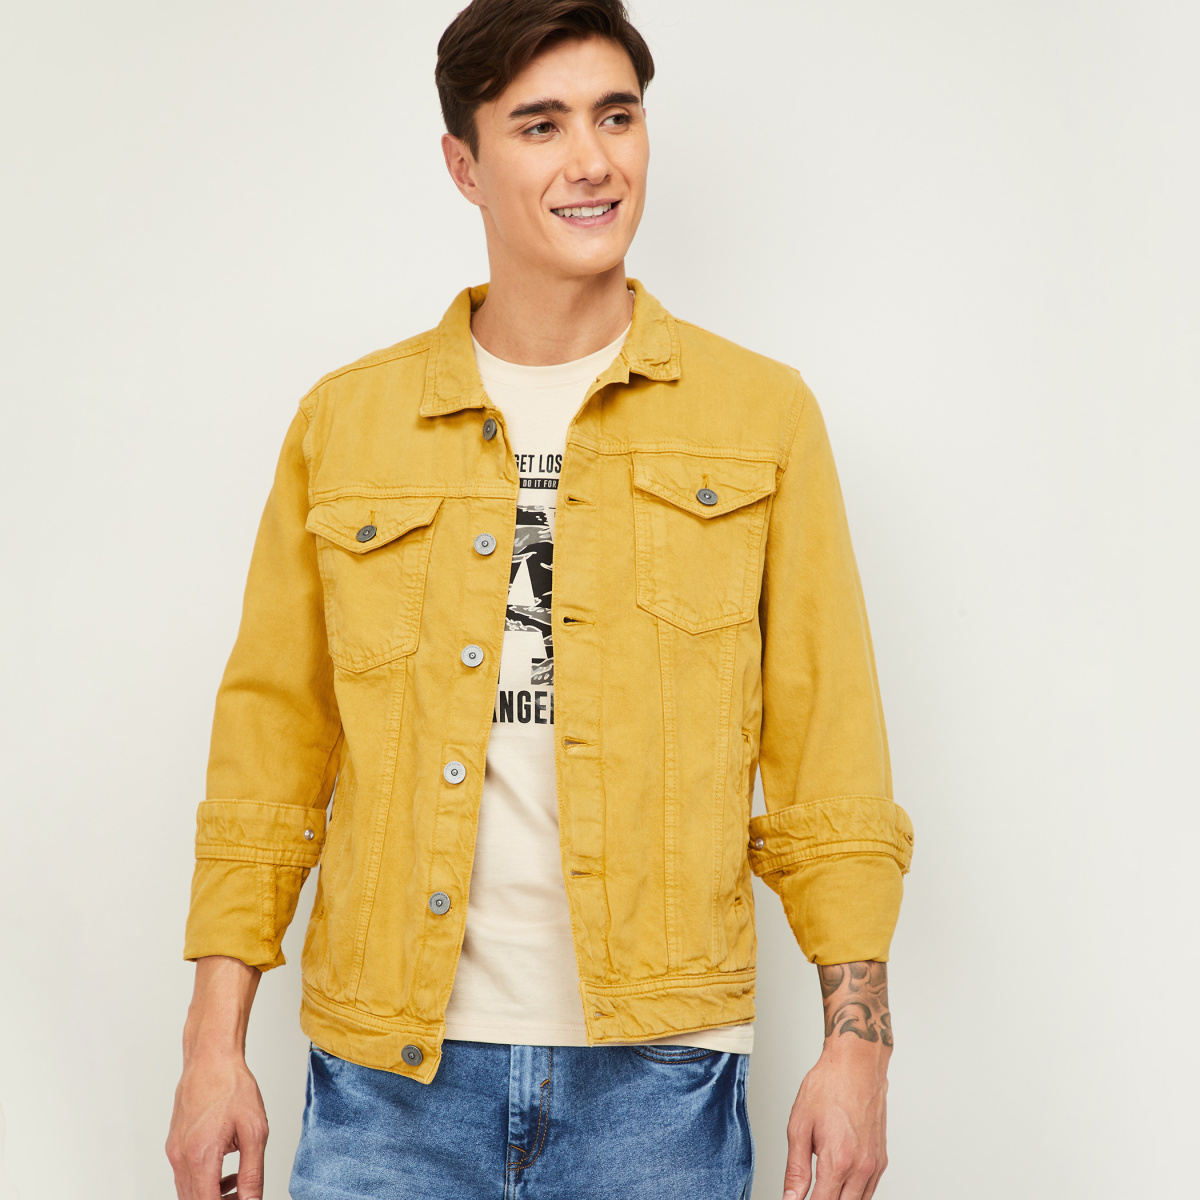 Denim Jackets in Yellow color for kids | FASHIOLA INDIA